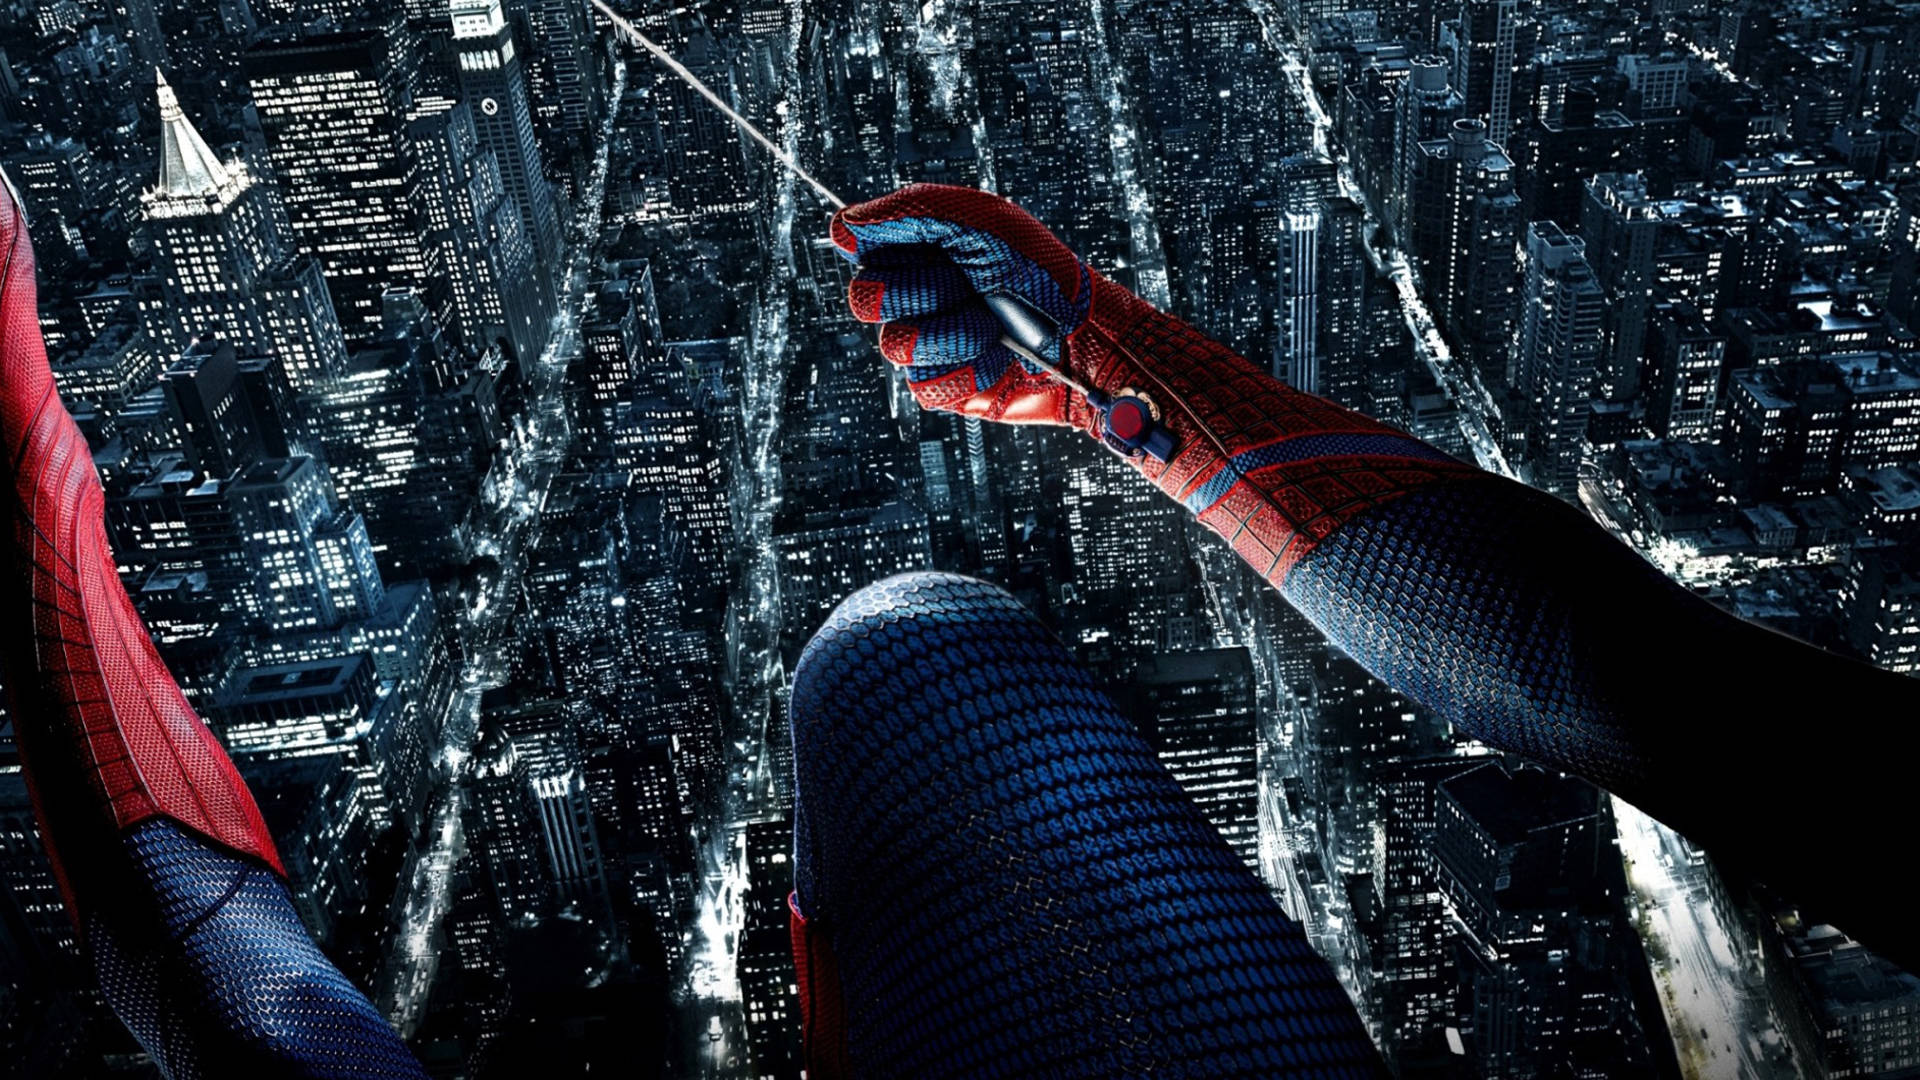 The Amazing Spider-Man swinging through his home town of New York City" Wallpaper